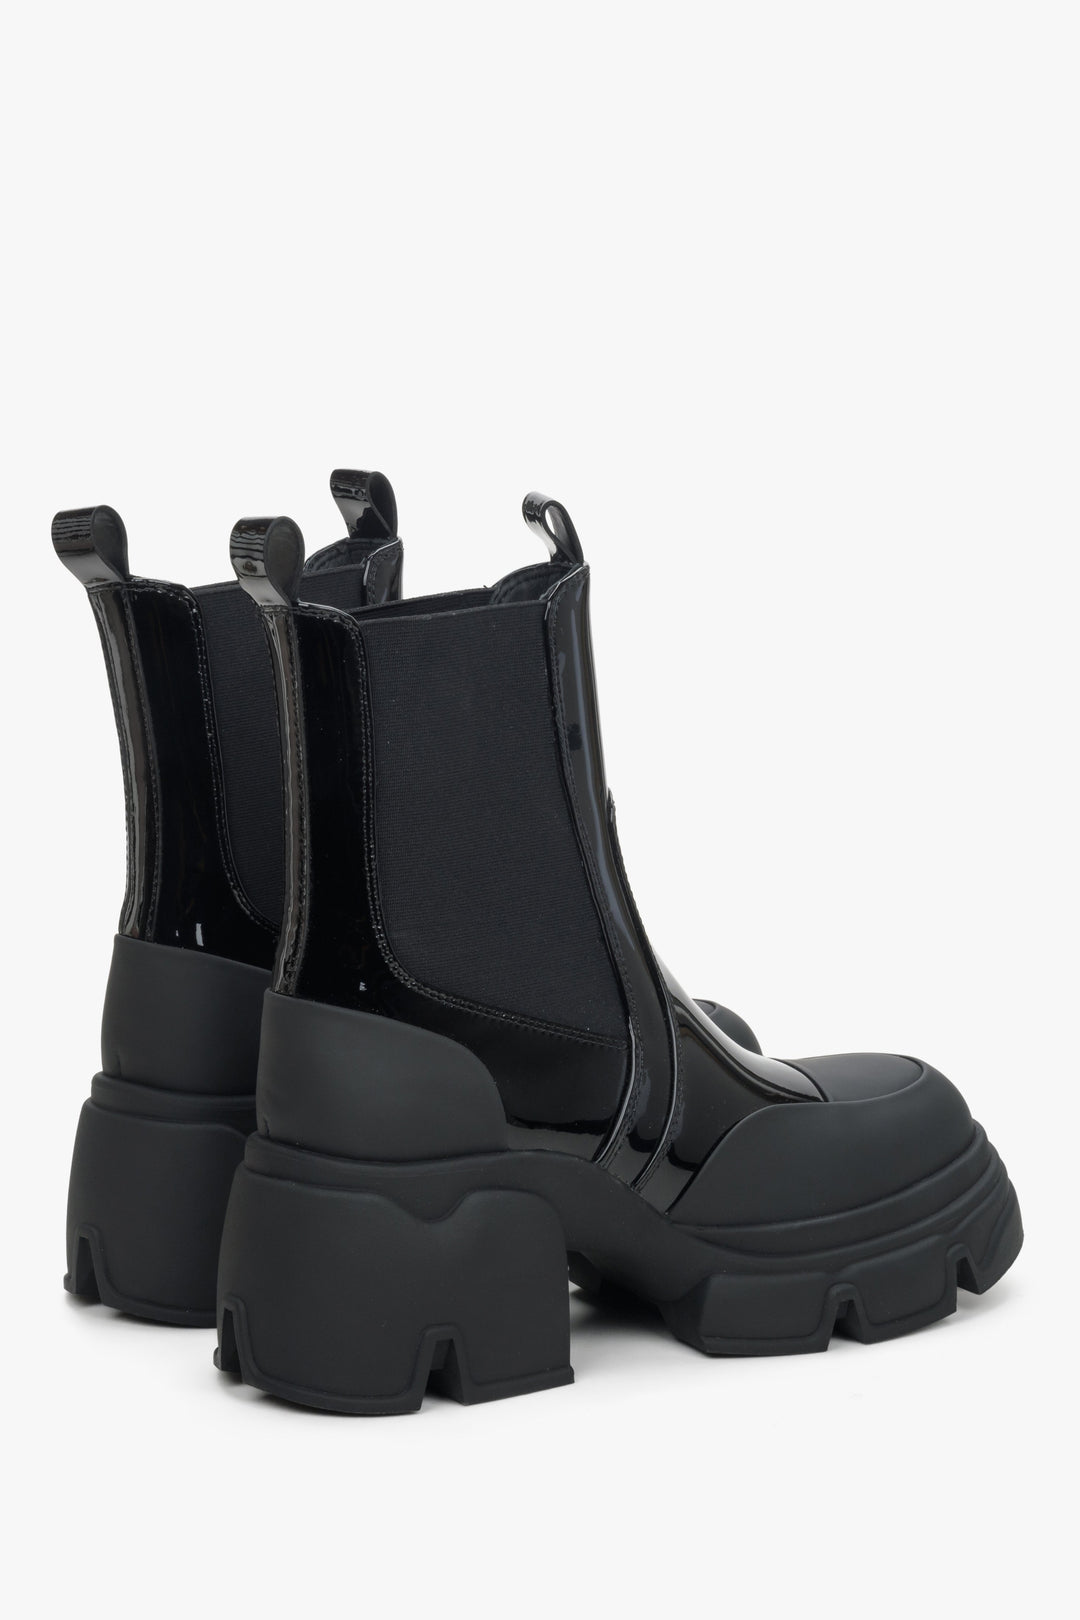 Women's black Chelsea boots made of patent genuine leather by Estro - close-up on the side line and heel counters of the shoe.